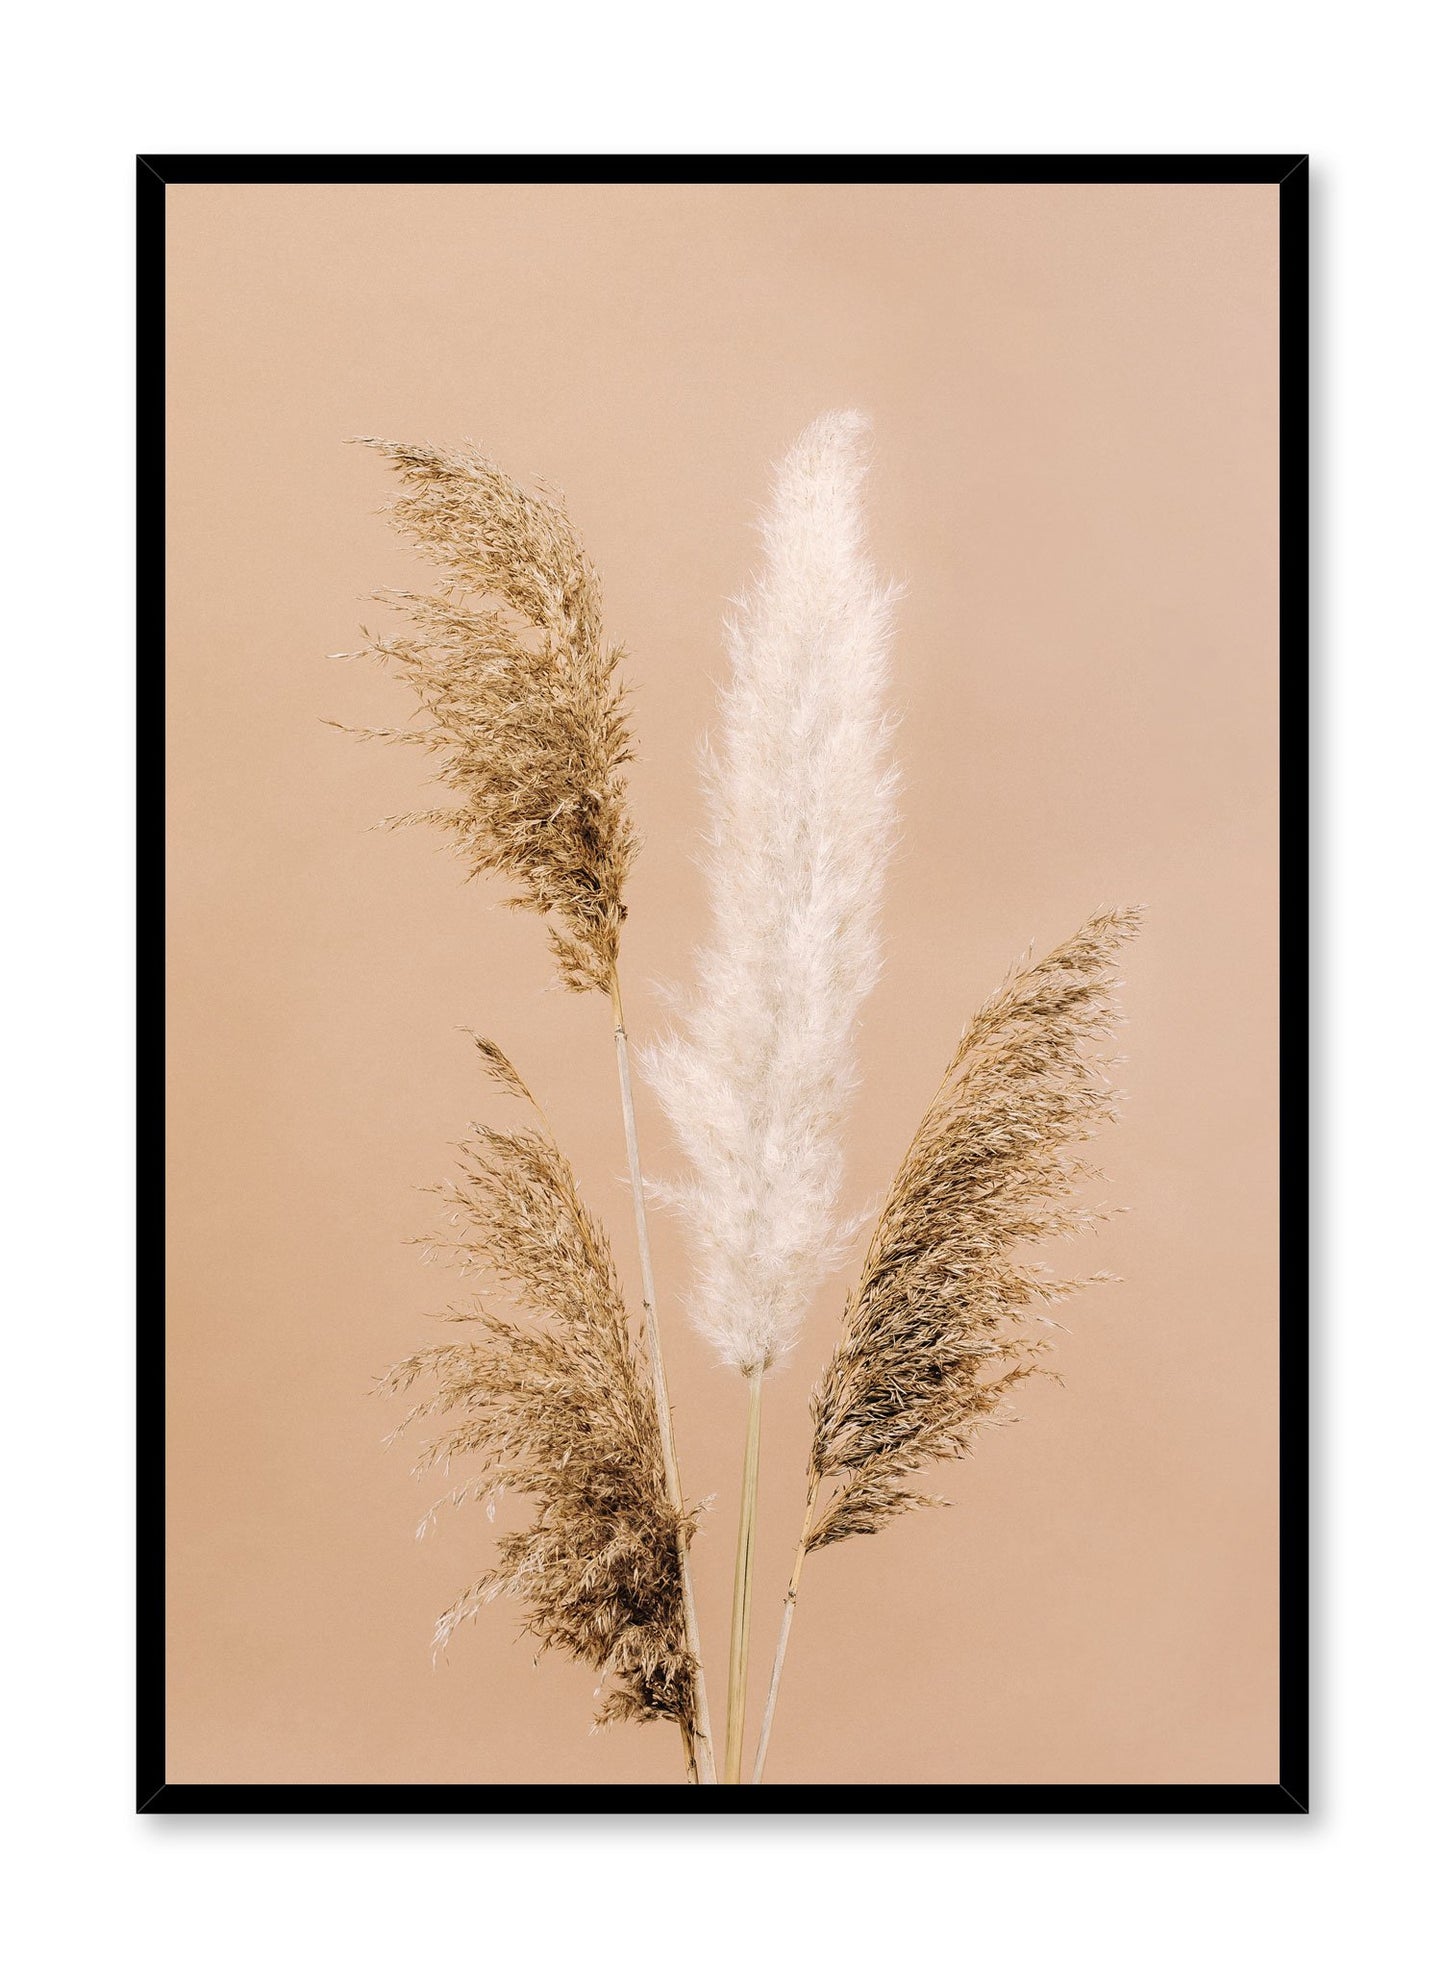 Minimalistic wall poster by Opposite Wall with Gathering of Grasses botanical photography